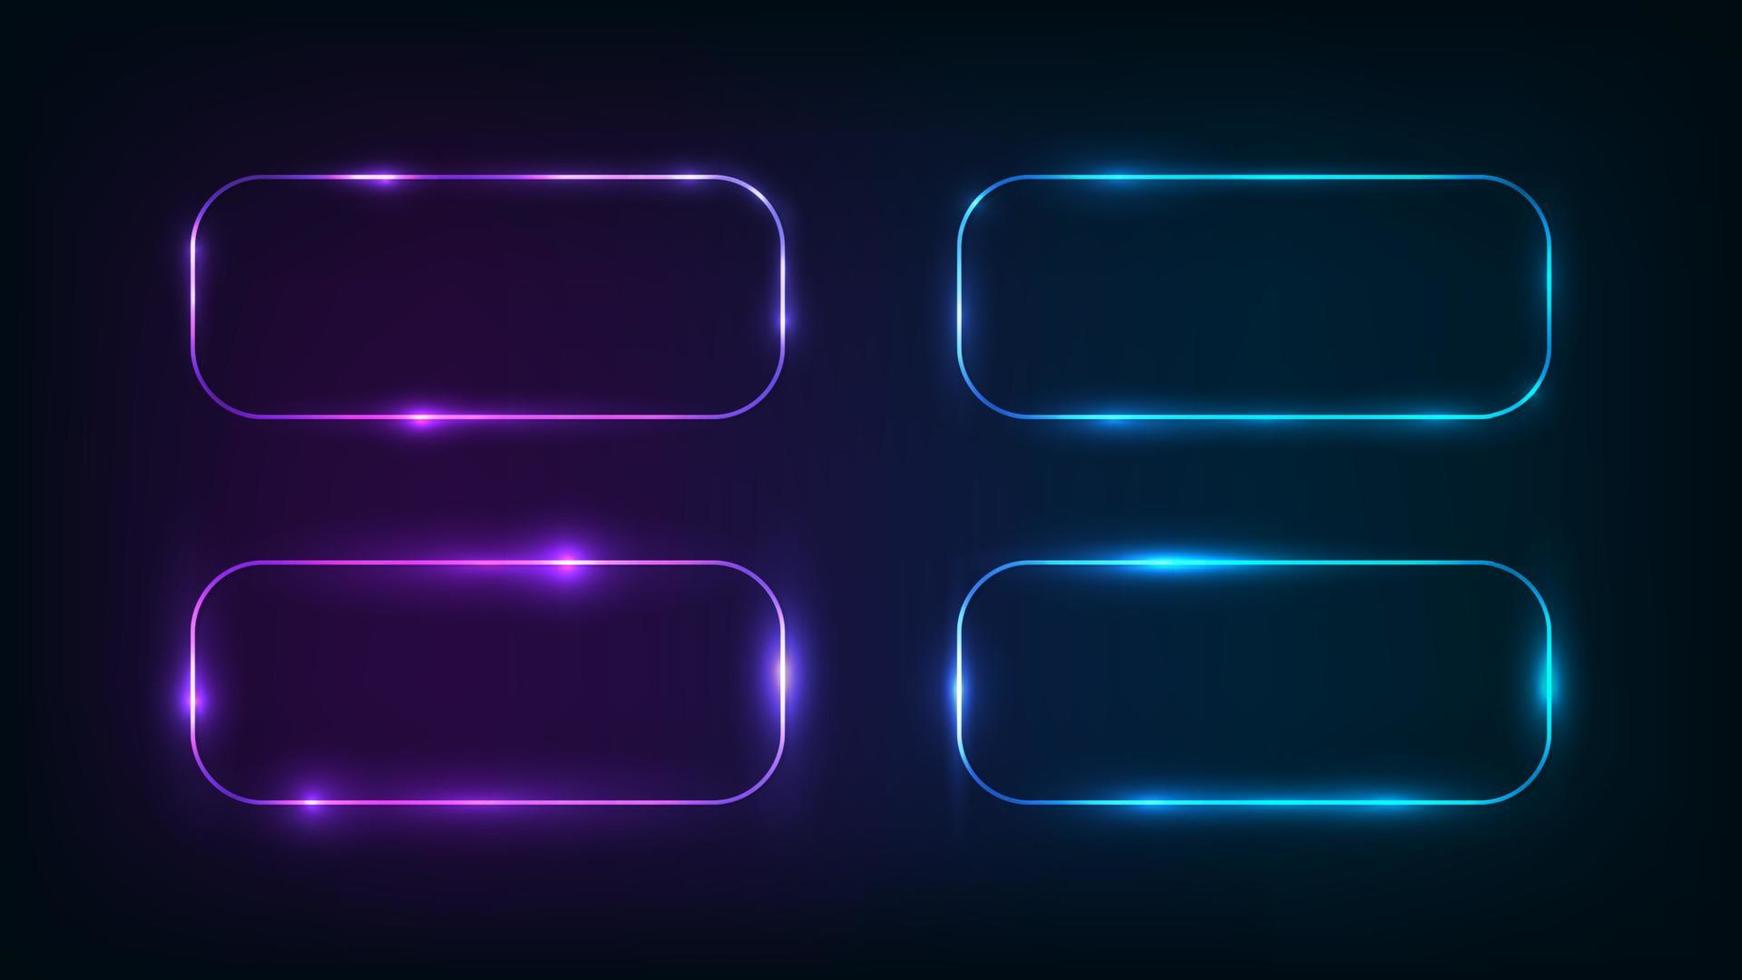 Set of four neon rounded rectangle frames with shining effects on dark background. Empty glowing techno backdrop. Vector illustration.